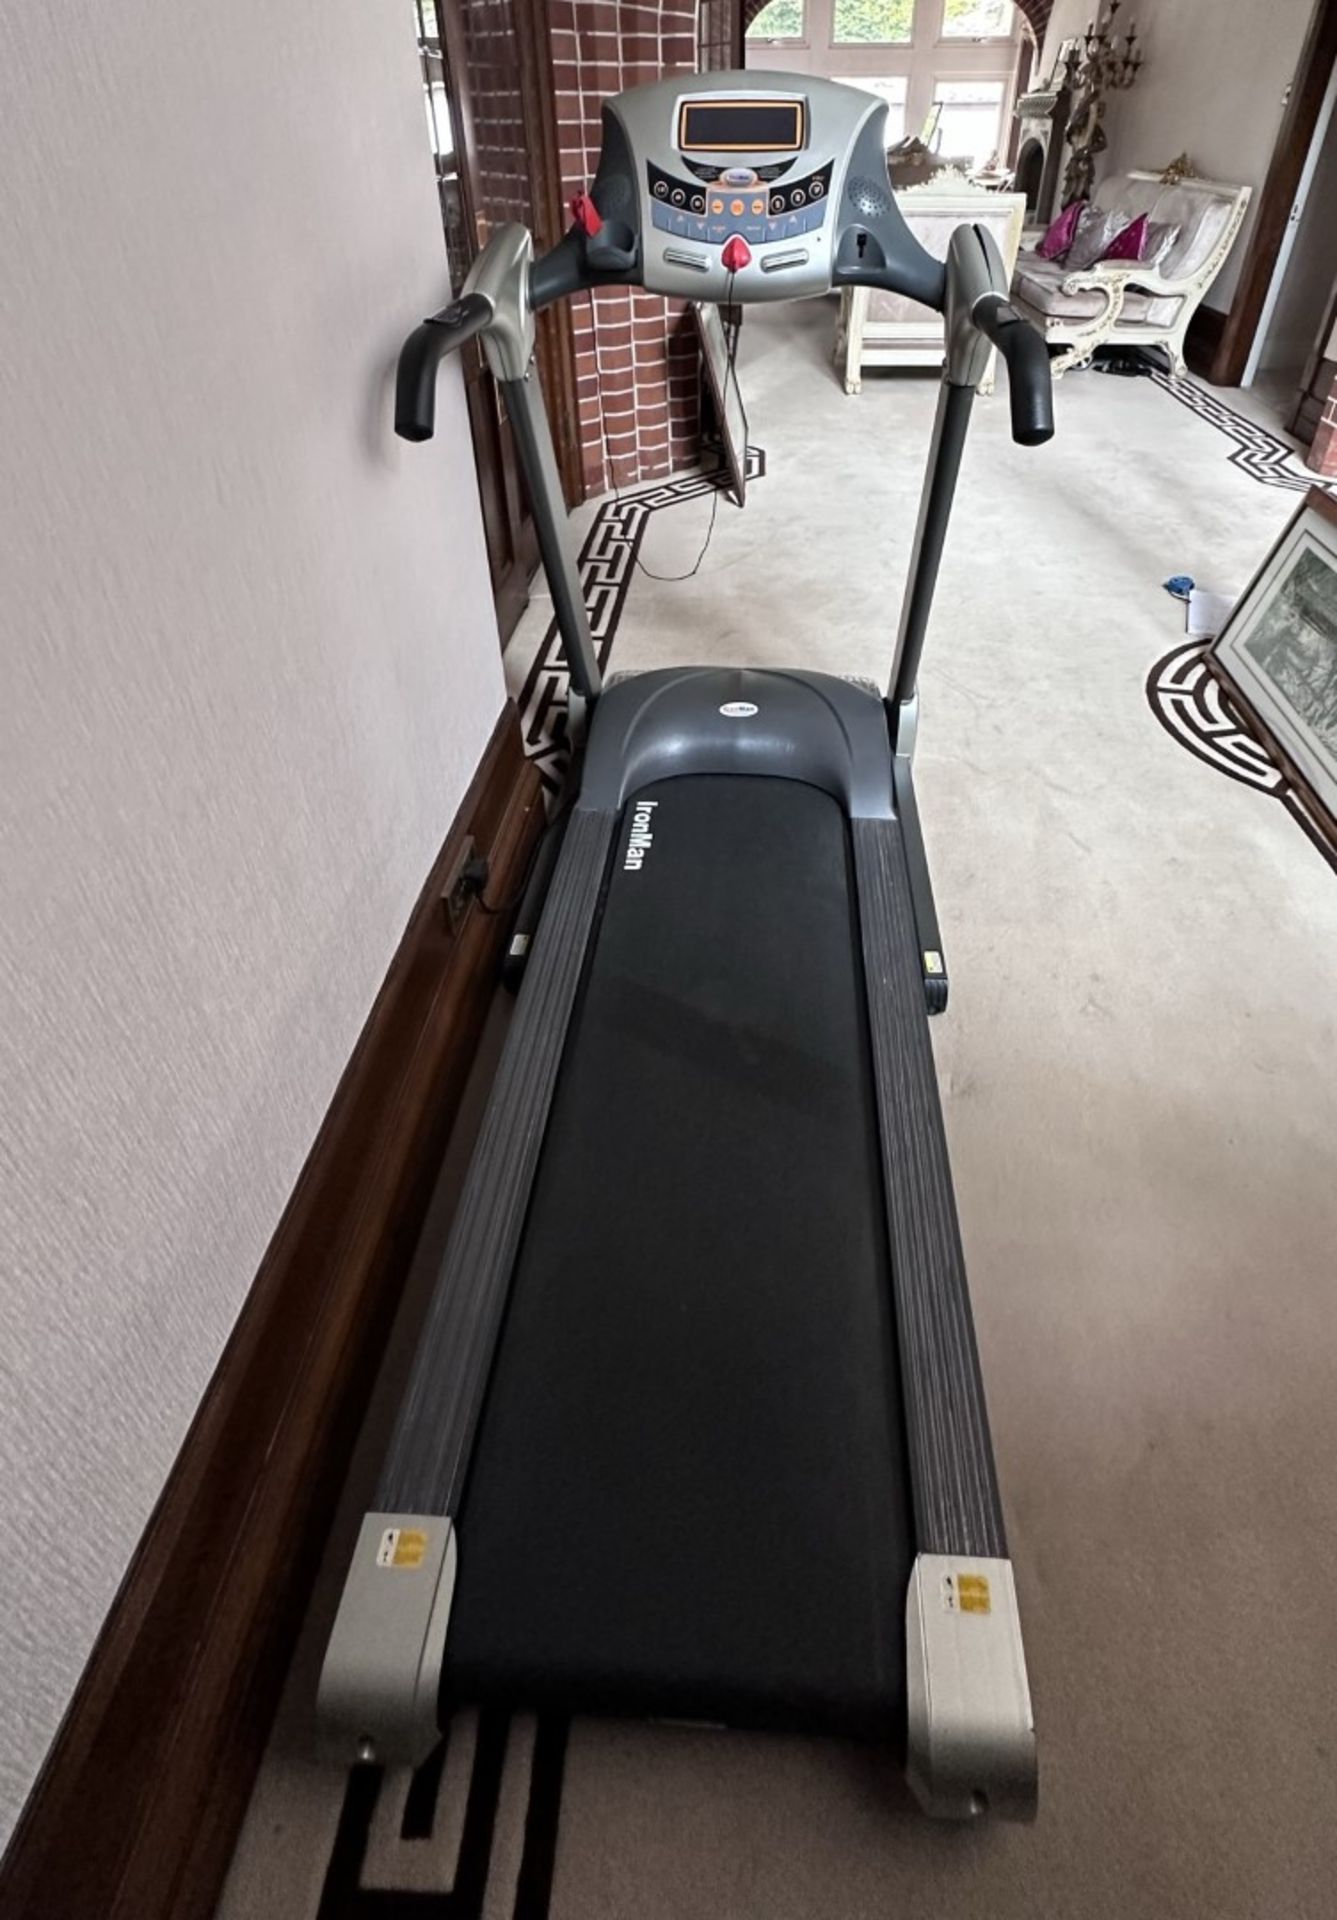 1 x IRON MAN D160 Running Machine With Backlit Screen And Speed/Incline Control Handlebars. - Image 2 of 10